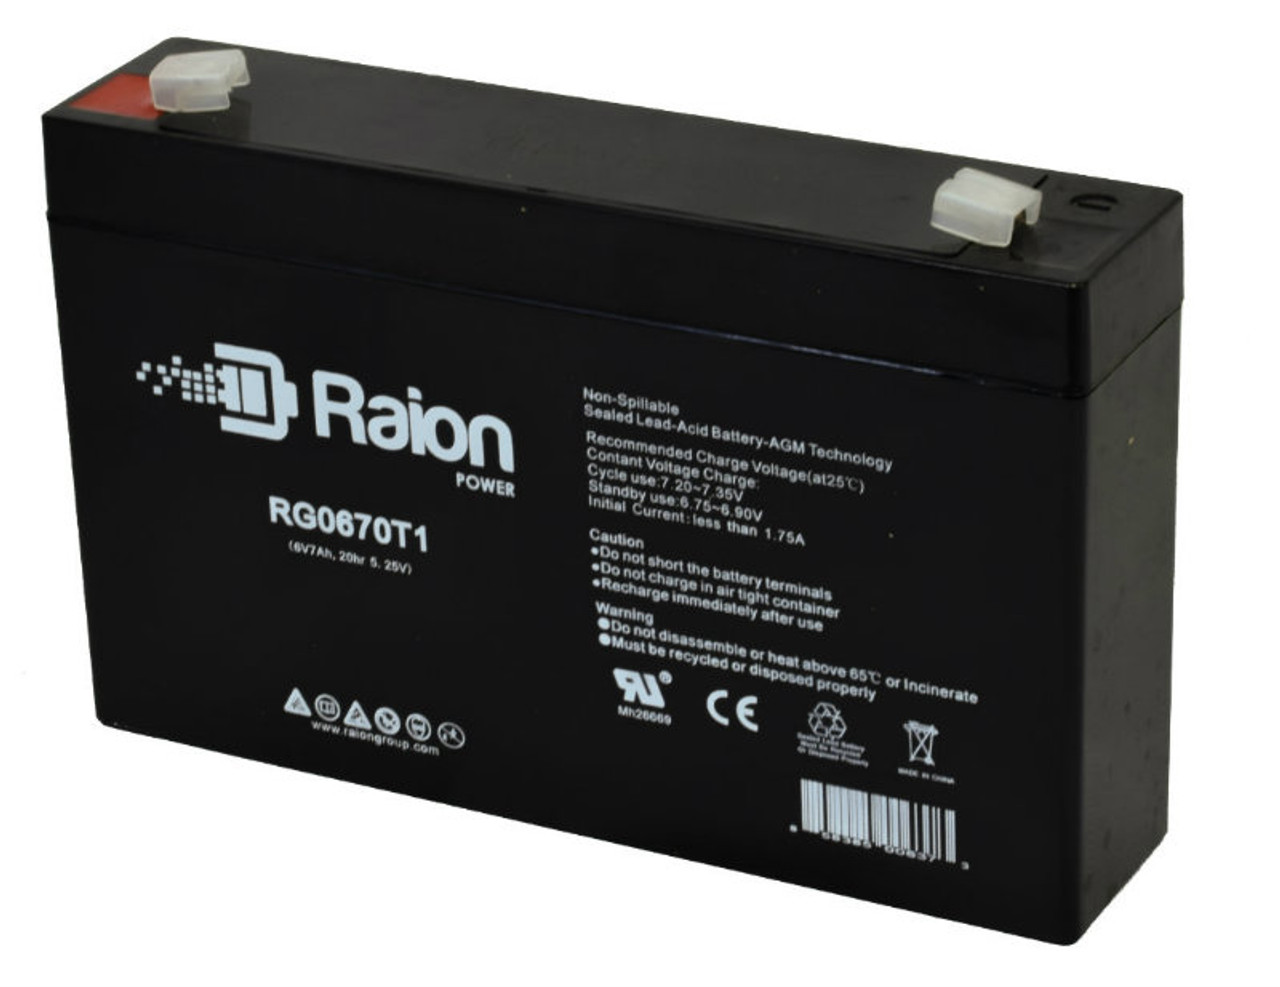 Raion Power RG0670T1 6V 7Ah Replacement Emergency Lighting Battery for Sure-Lites PS167